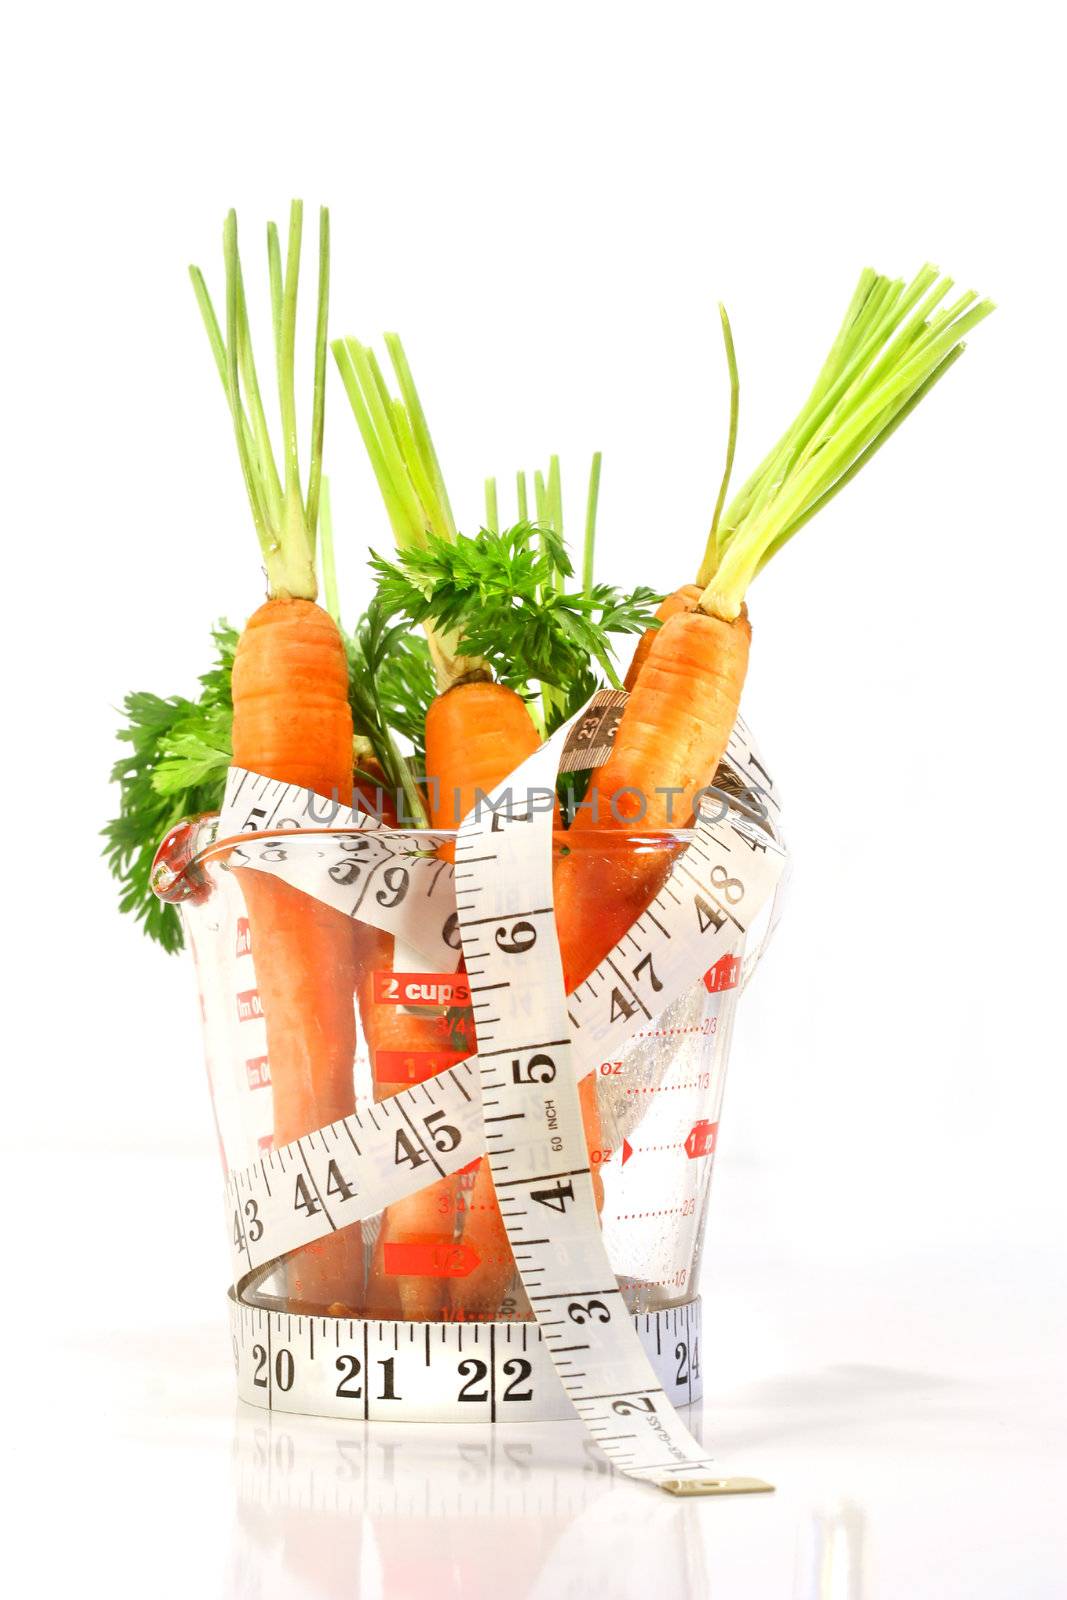 Carrots in a measuring cup with tape measure on white background